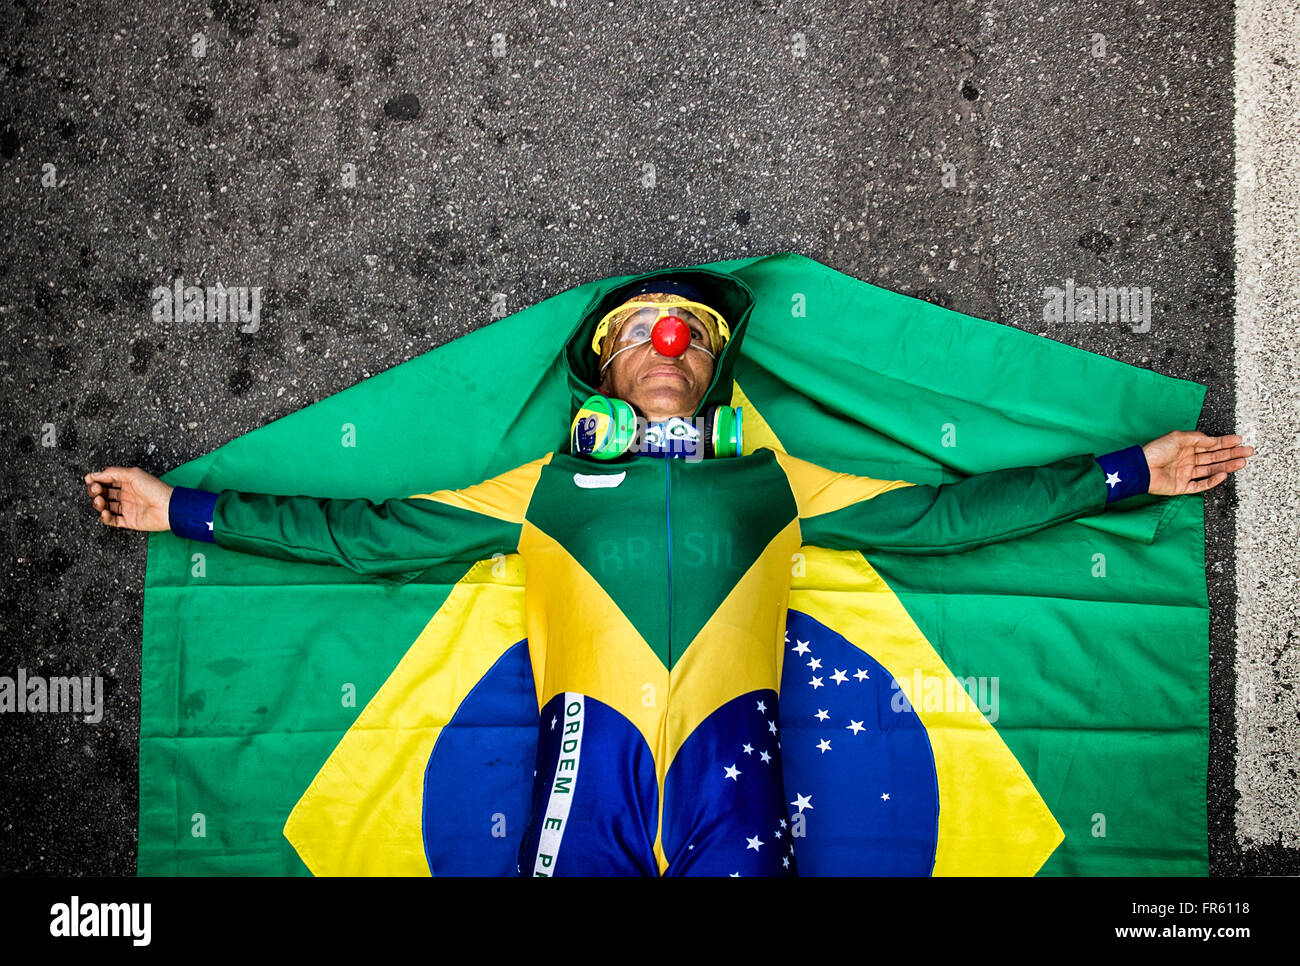 Sao Paulo, Brazil. 20 March 2016. Brazilian woman Ana Luiza Garcez is laying on the ground atop a Brazilian flag with her arms outstretched. She's wearing a Brazilian flag jumpsuit and a clown nose. All over Brazil, people have been taking to the streets to protest the growing number of corruption scandals being uncovered at all levels of the current government. Stock Photo